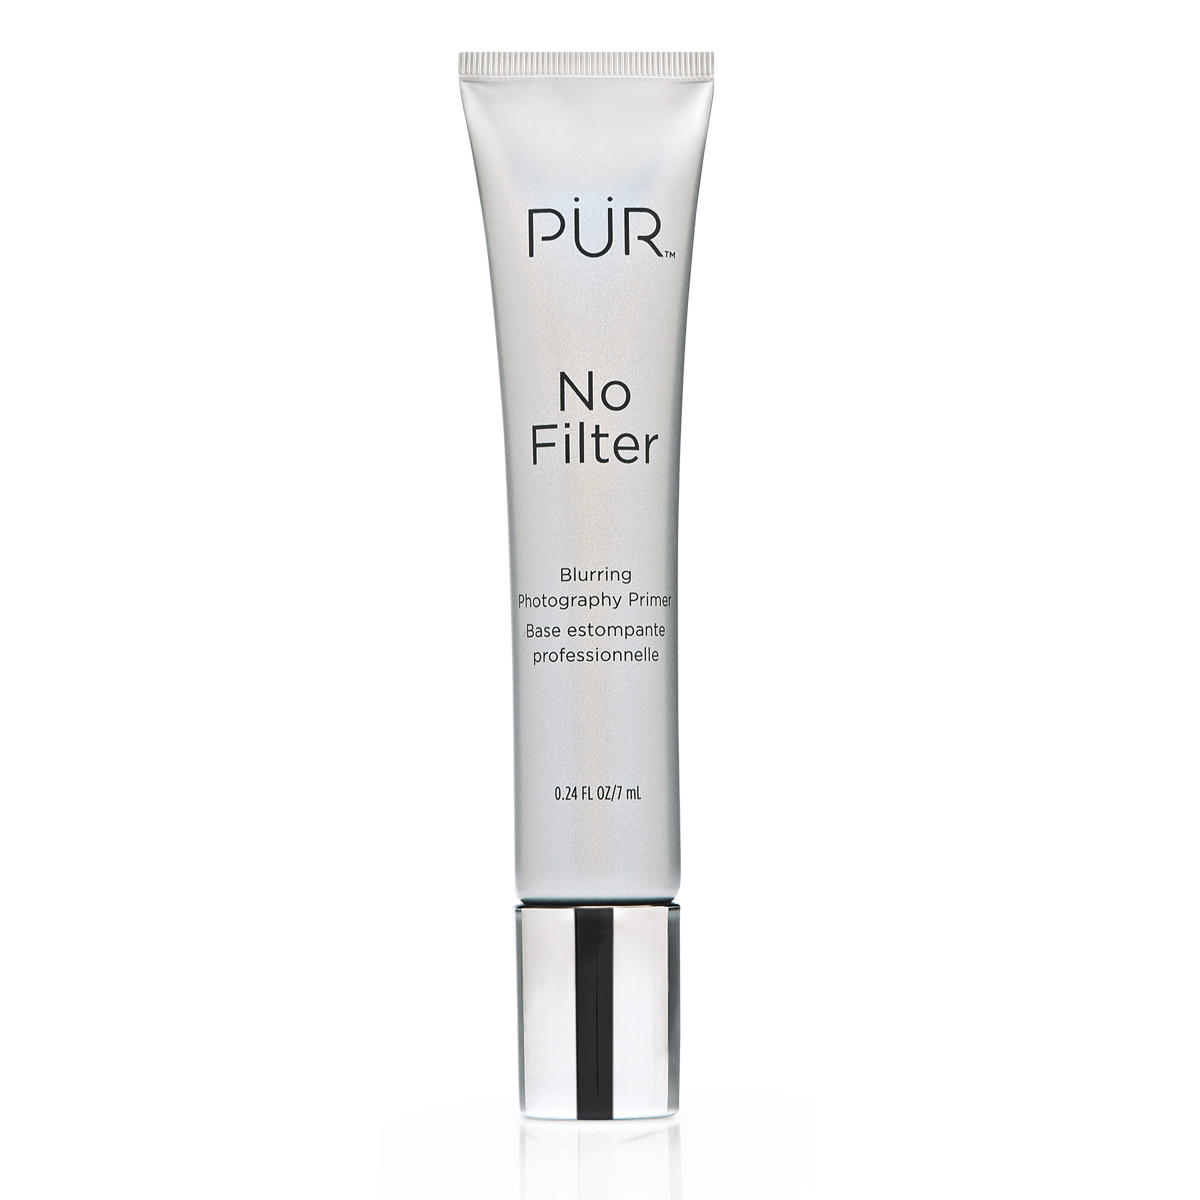 PUR Cosmetics No Filter Blurring Photography Primer Travel